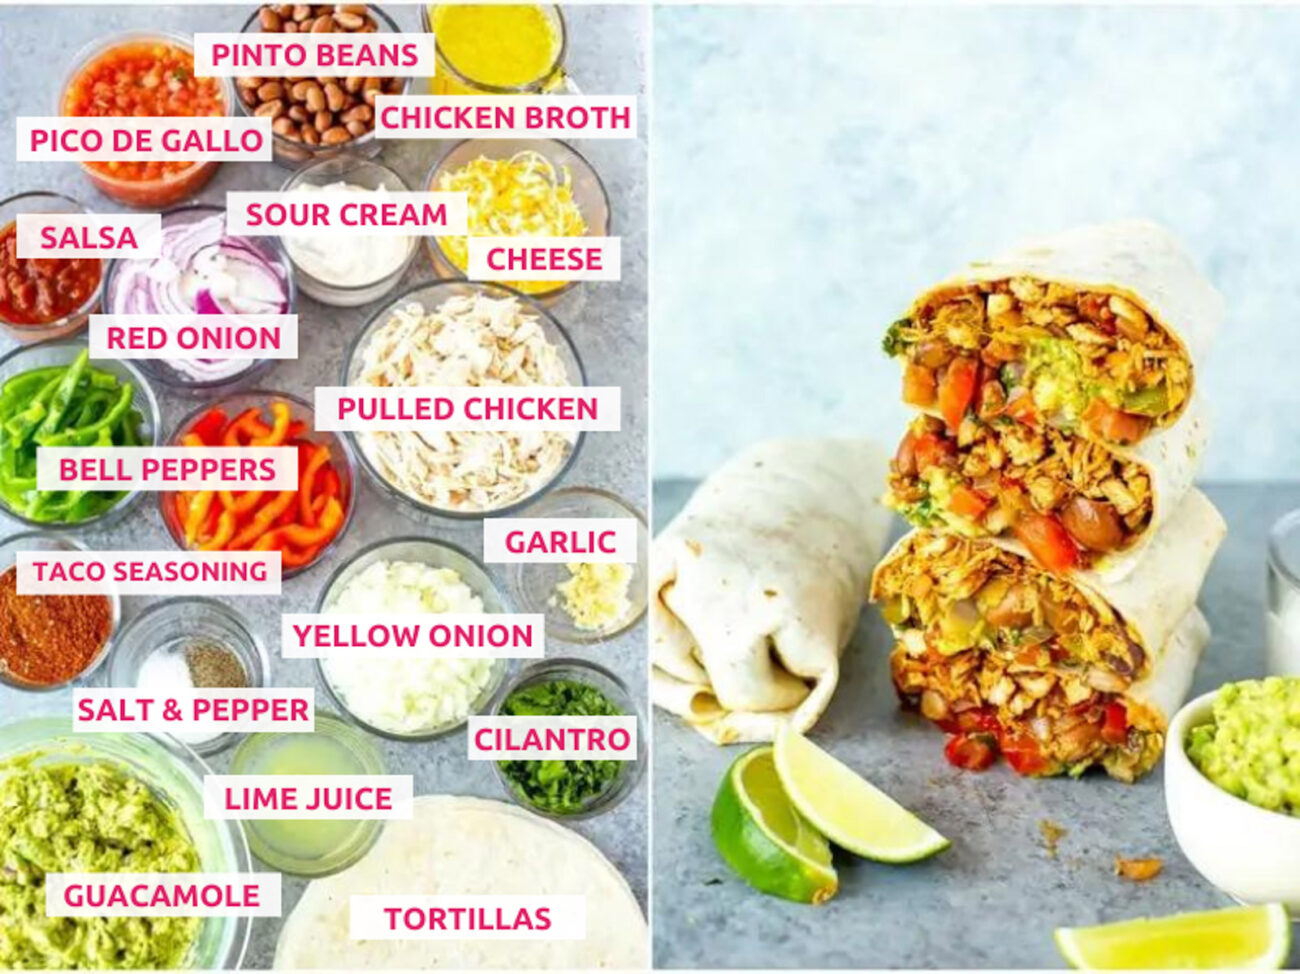 Ingredients for chicken burrito: chicken breasts, tortillas, guacamole, lime juice, cilantro, yellow onion, garlic, cheese, sour cream, bell peppers, salsa, salt, pepper, red onion, sour cream, chicken broth and pinto beans.